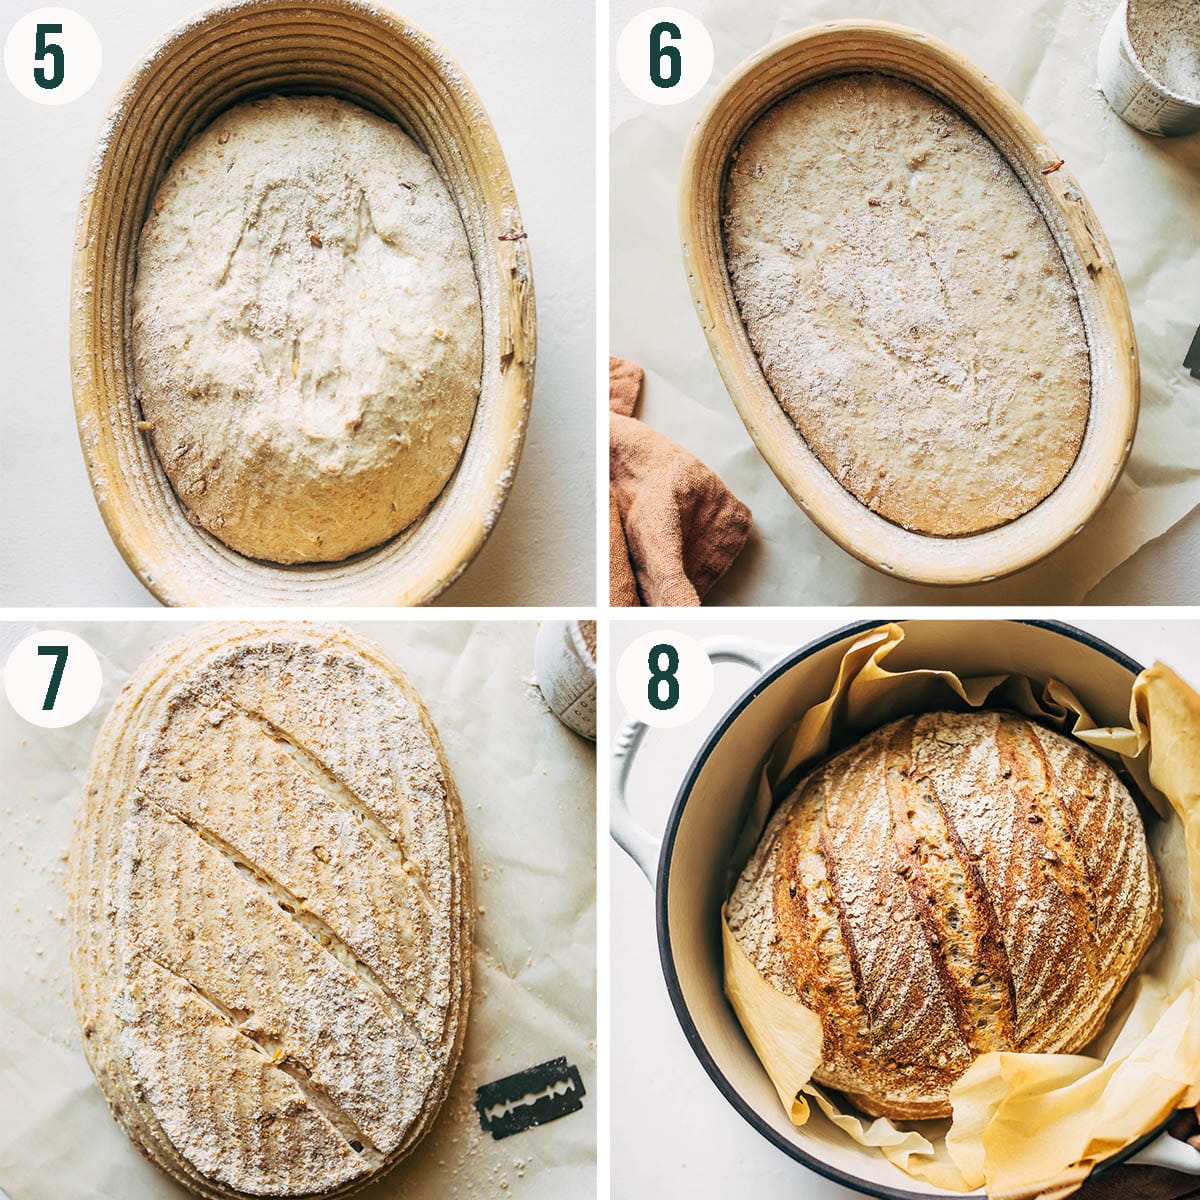 Sourdough steps 5 to 8, before and after rising in the banneton, scored bread, and after baking.